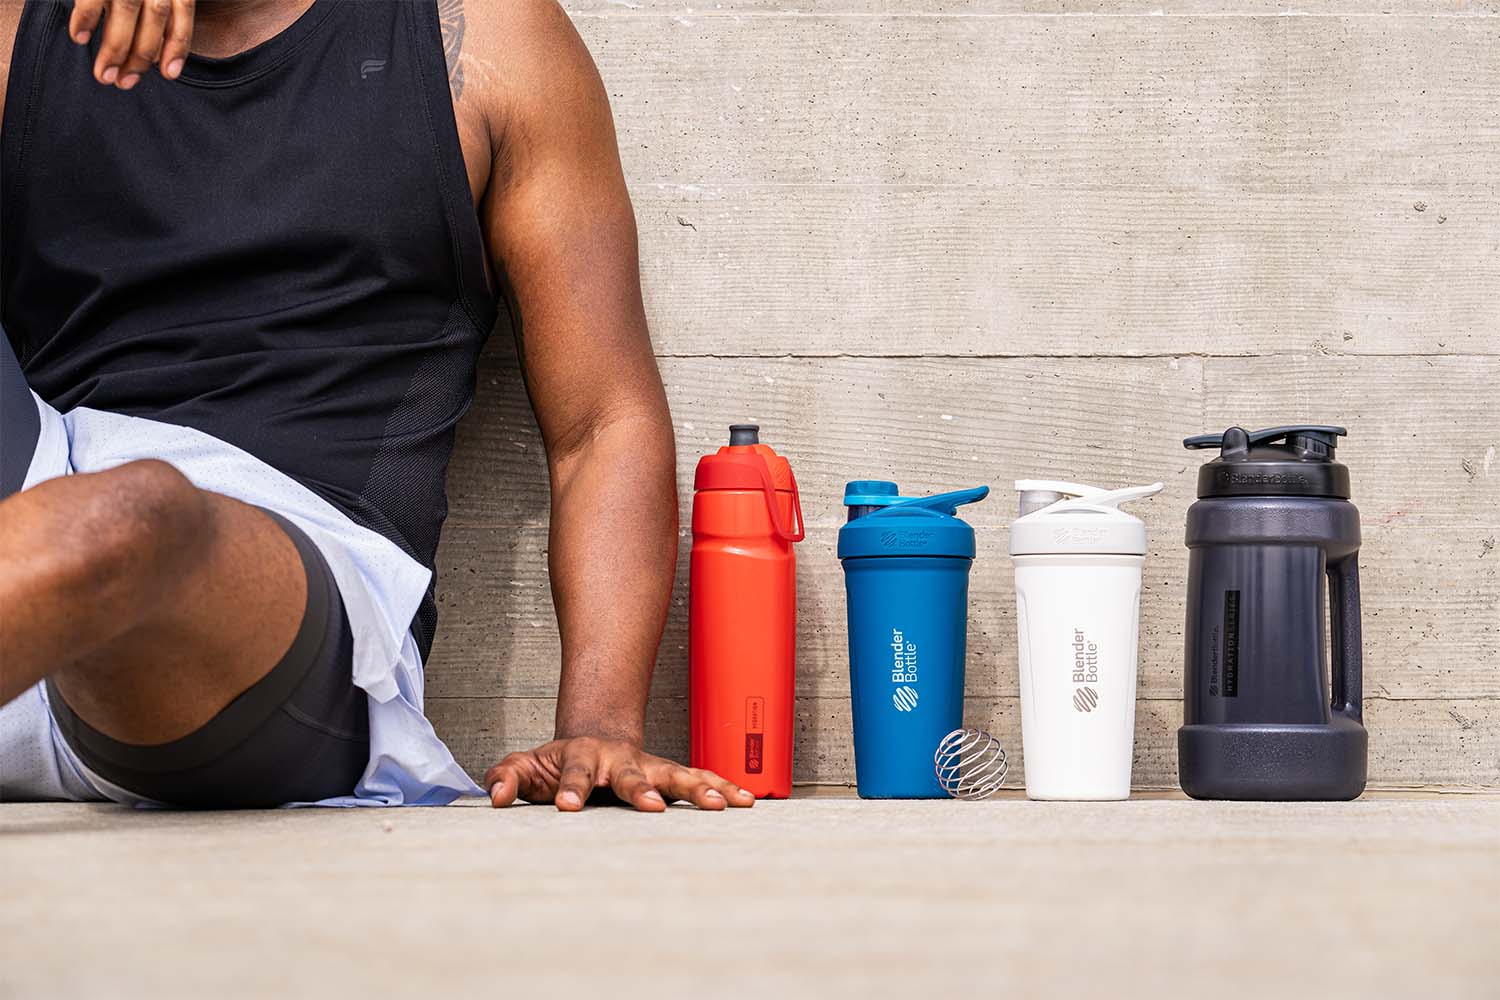 Premium Photo  Exercise black man and water bottle for workout